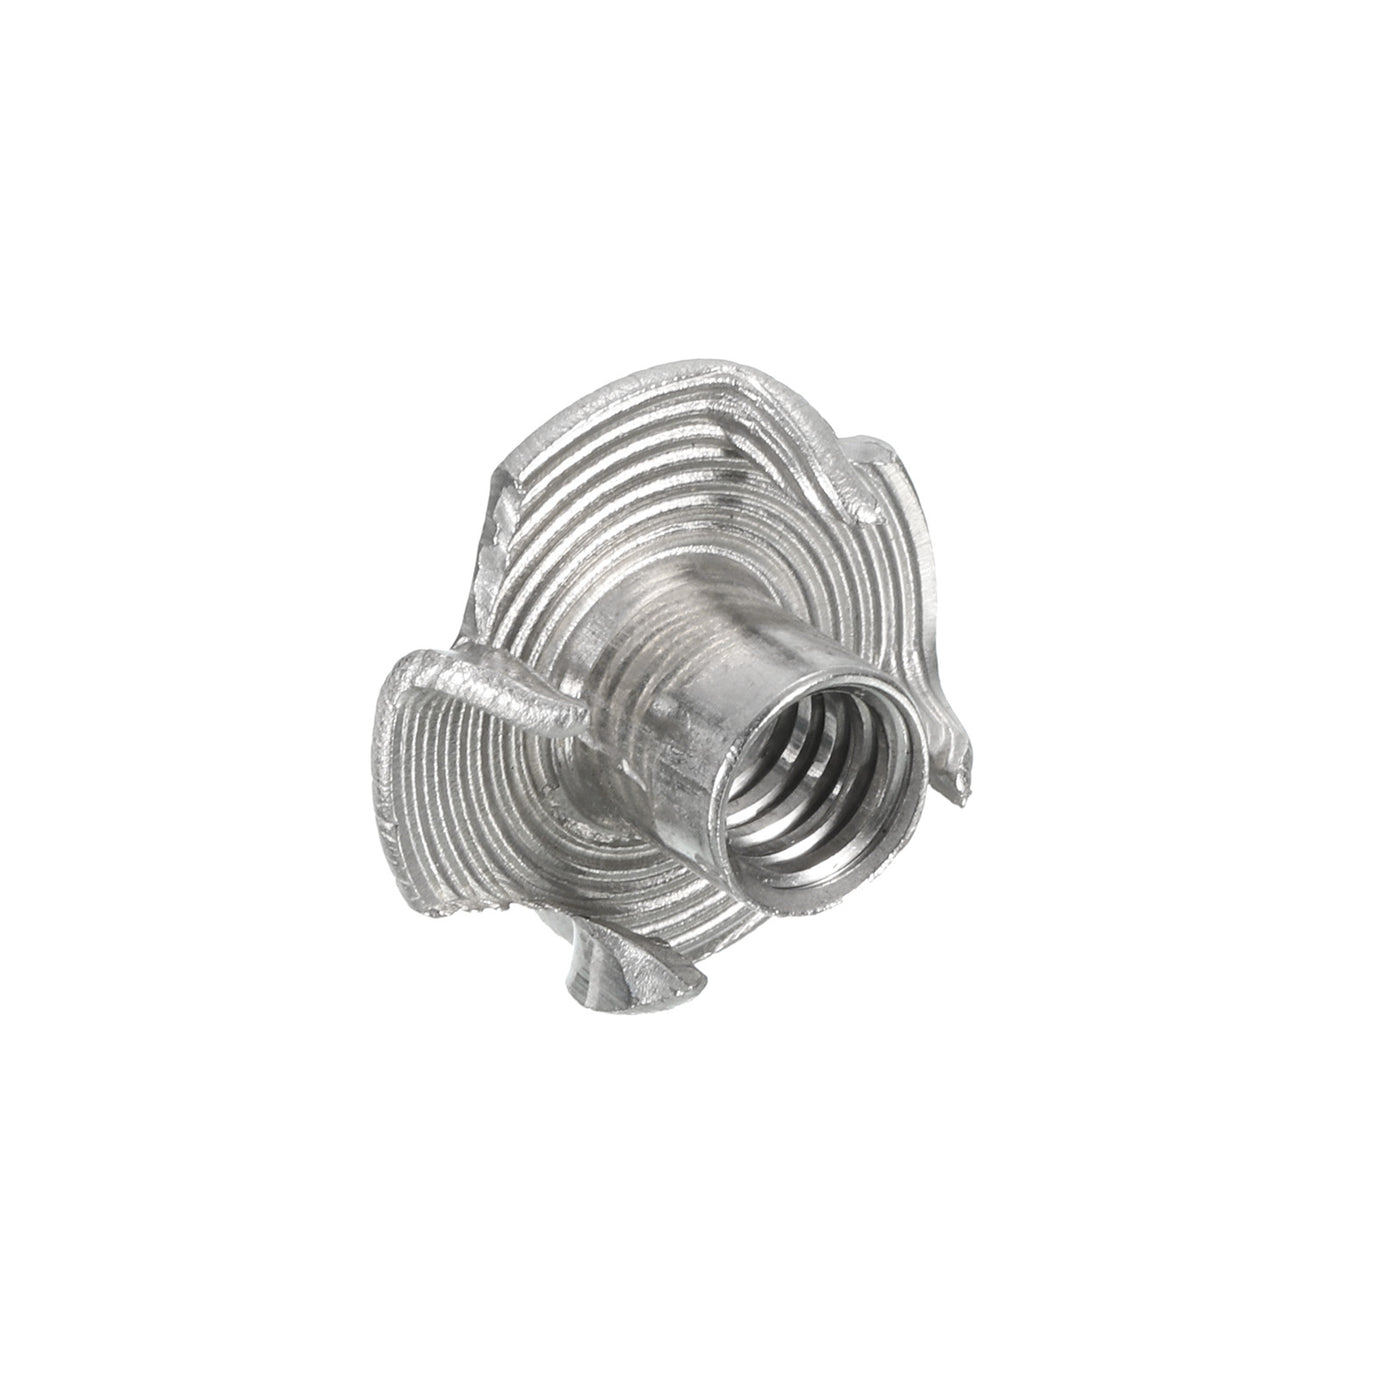 uxcell Uxcell 1/4"-20 T-nut 100pcs 304 Stainless Steel 4 Pronged Tee Nuts Threaded Insertion